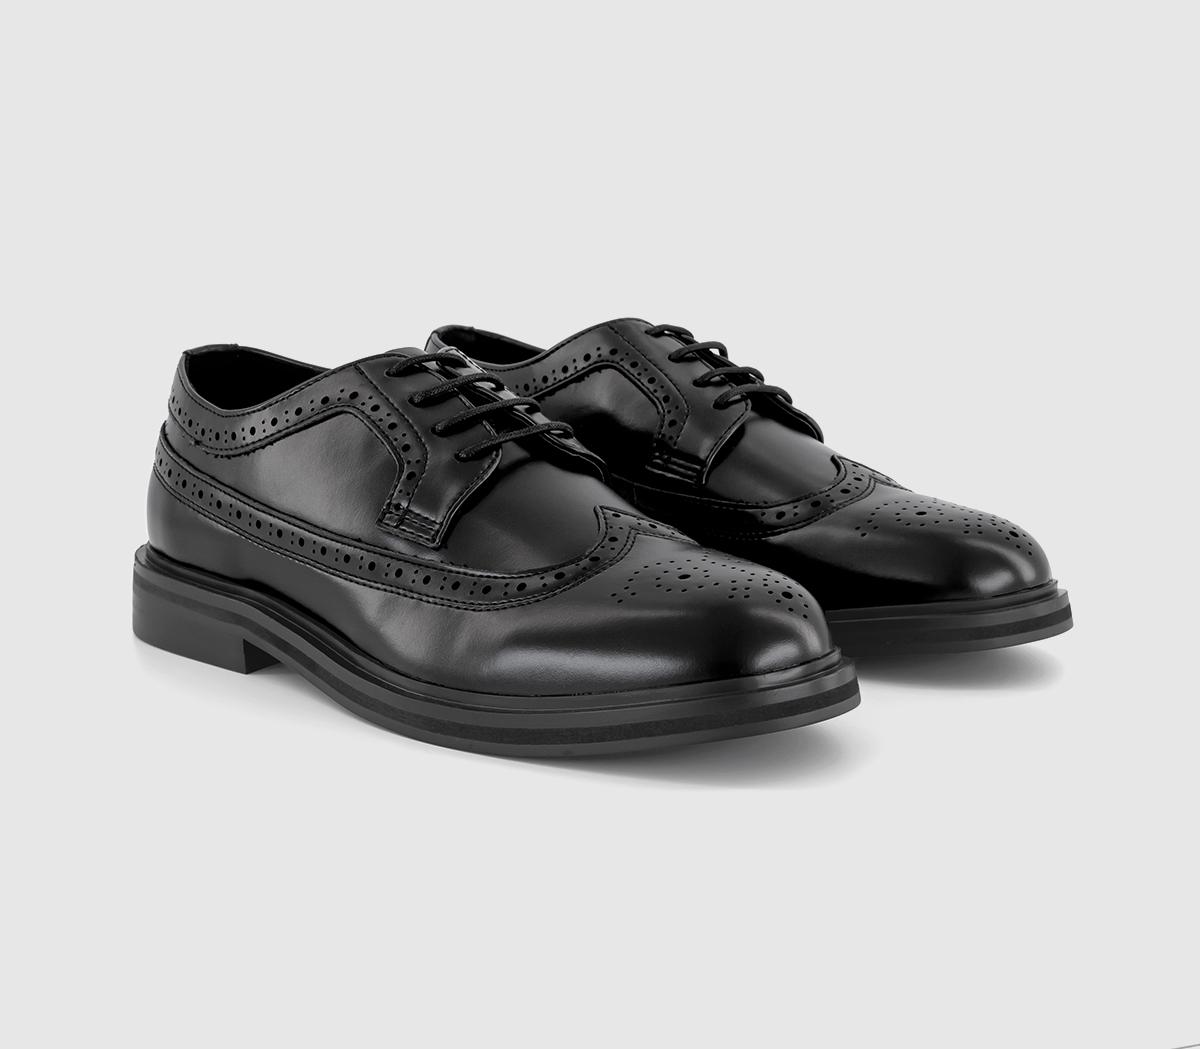 OFFICE Marc Chunky Longwing Brogue Shoes Black - Men’s Smart Shoes